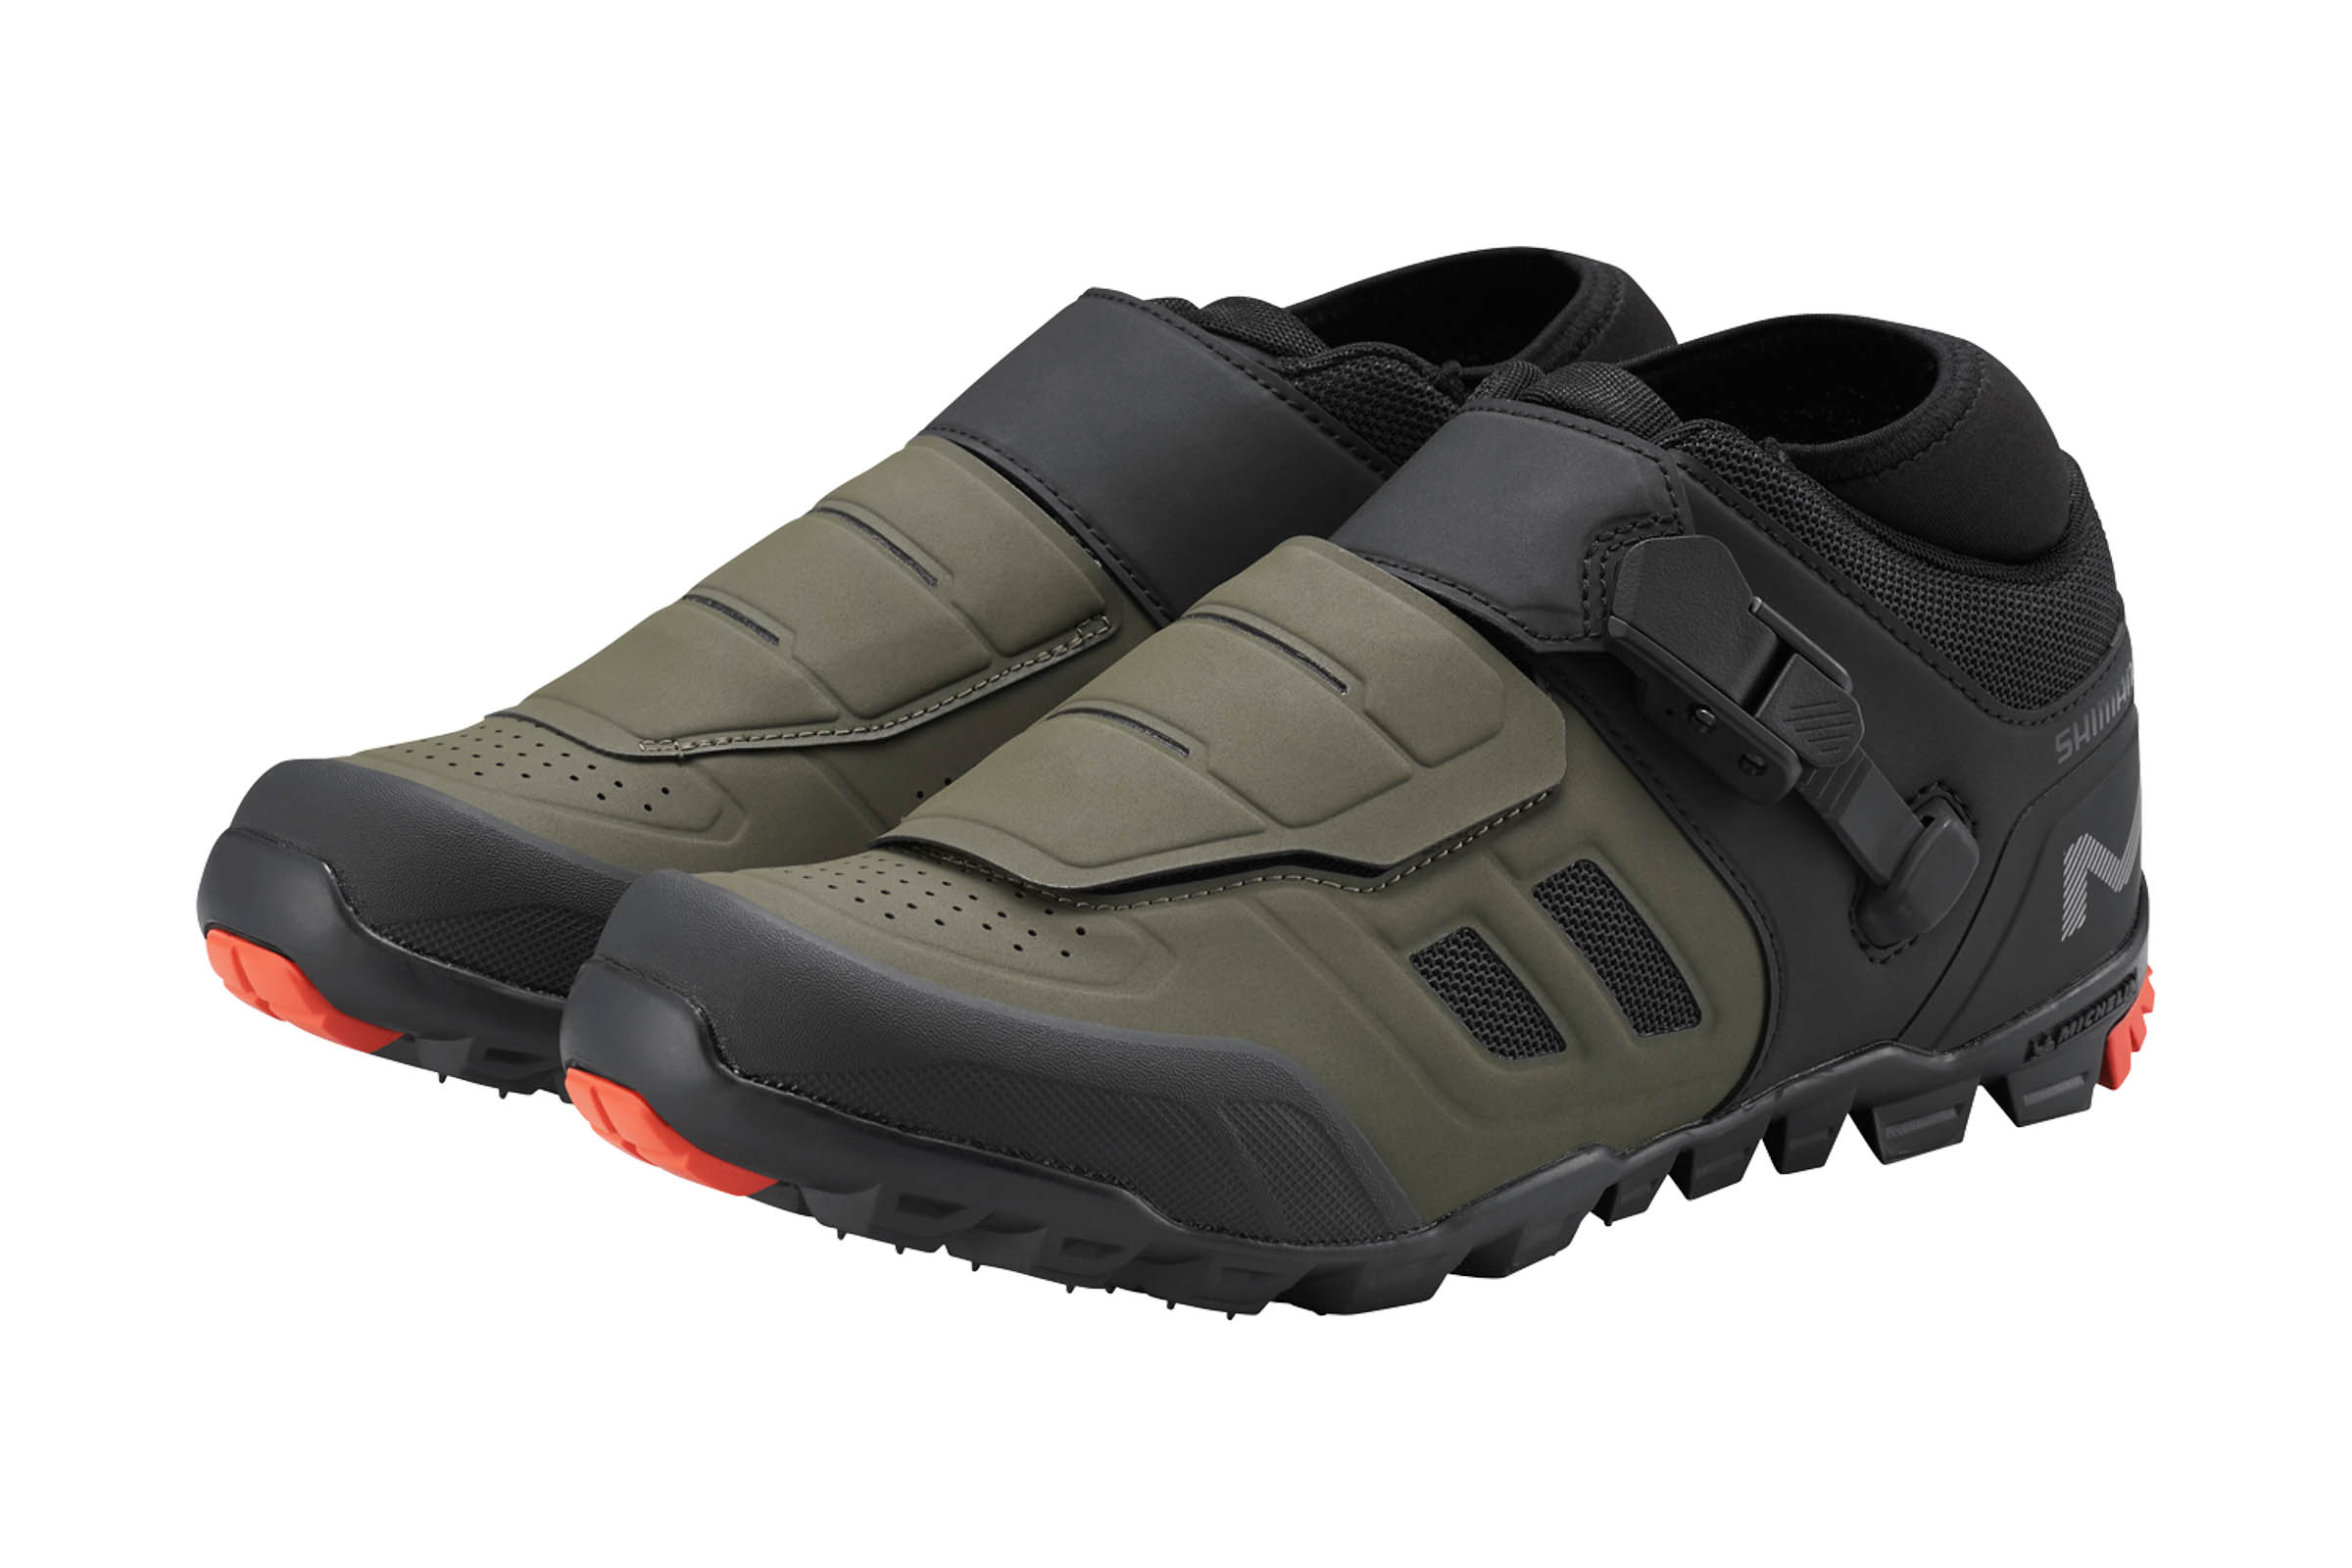 Updated 2021 Shimano ME7 and ME5 Shoes - BIKEPACKING.com